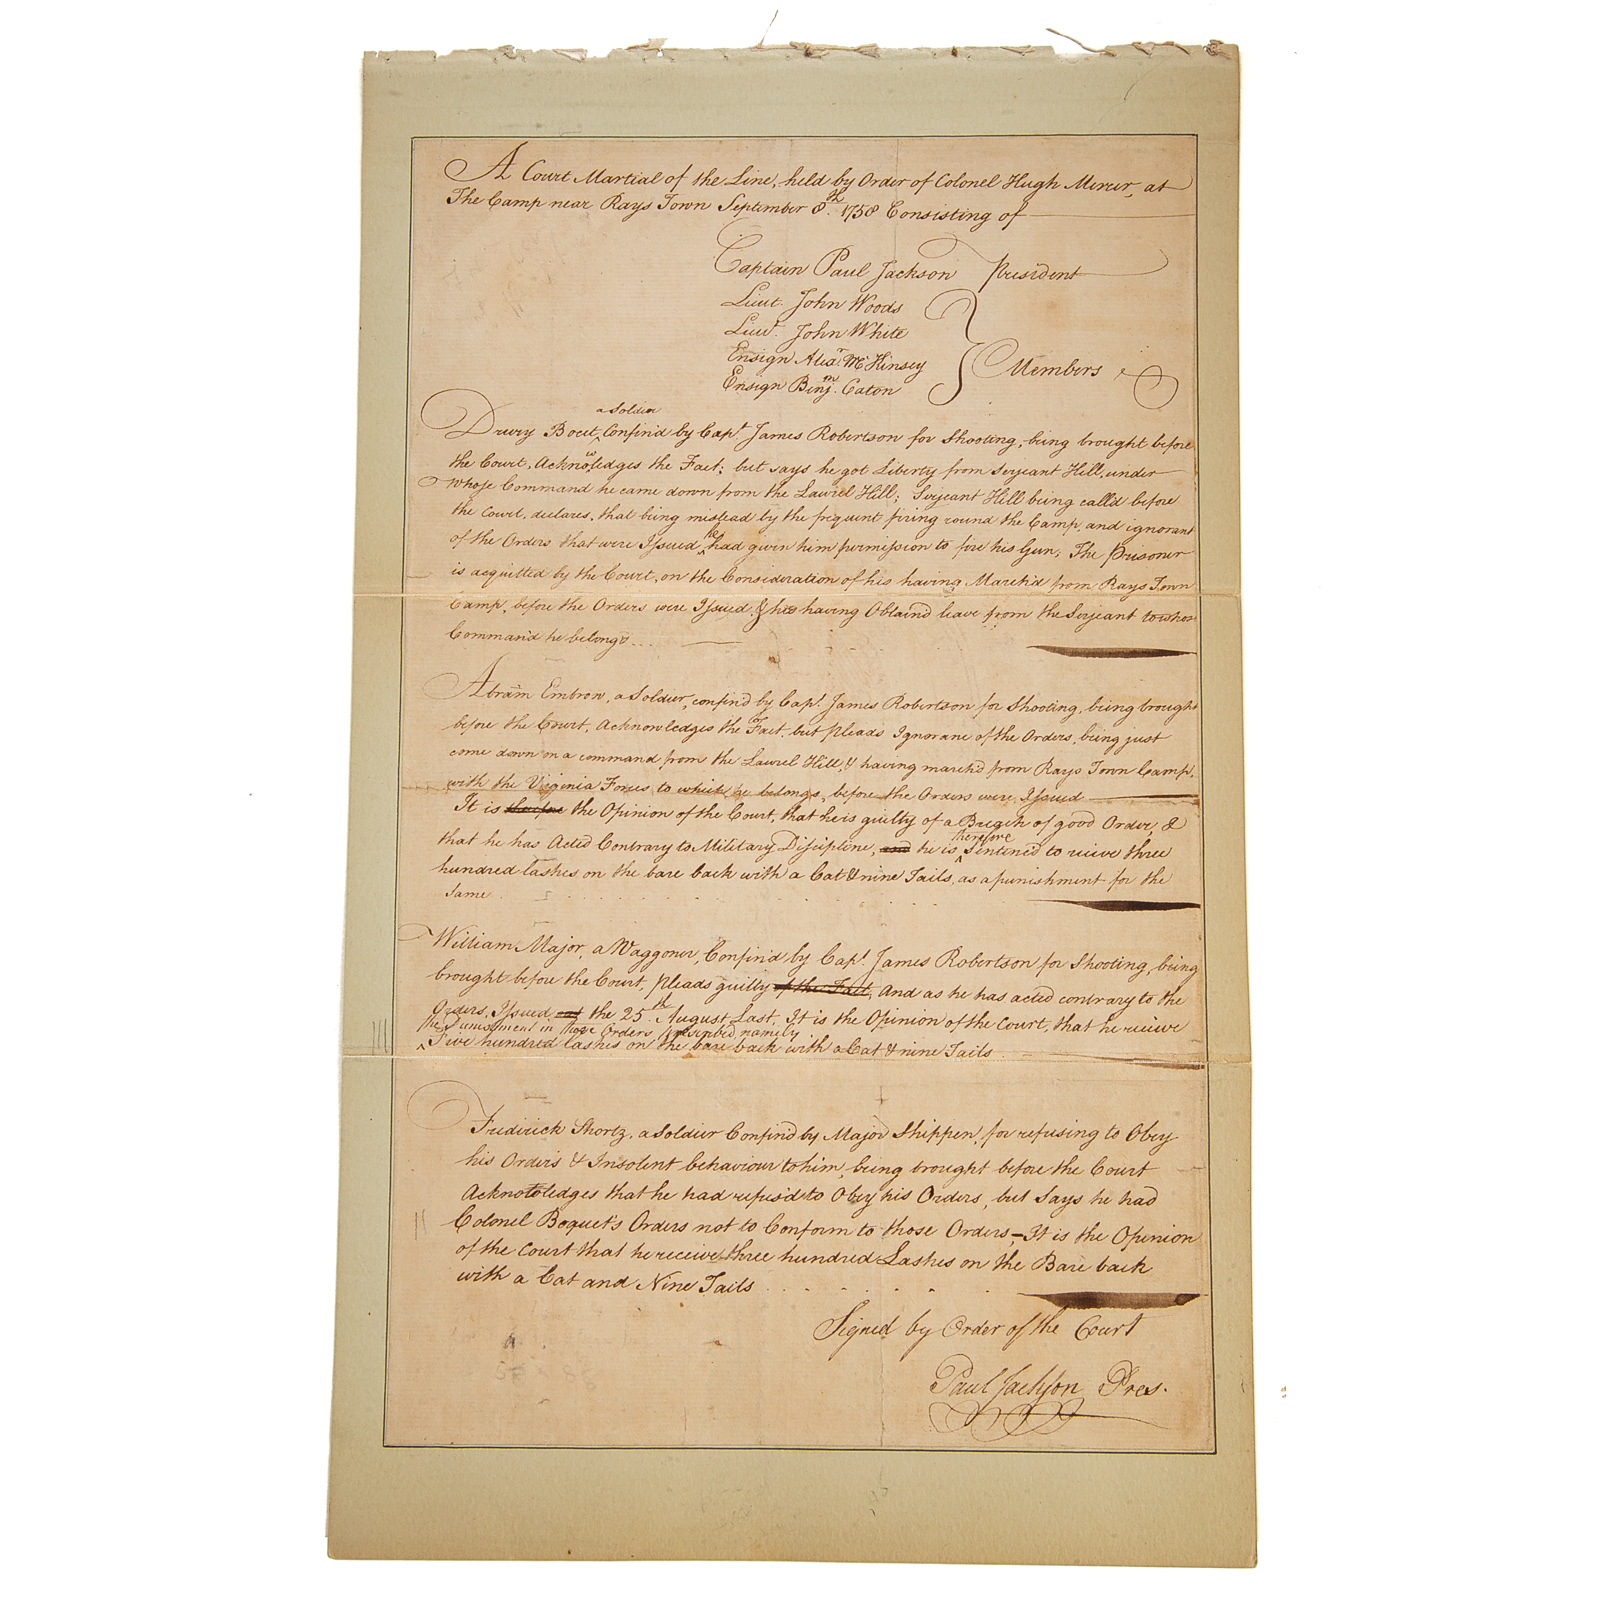 COURT MARTIAL DOCUMENT; FORBES'S